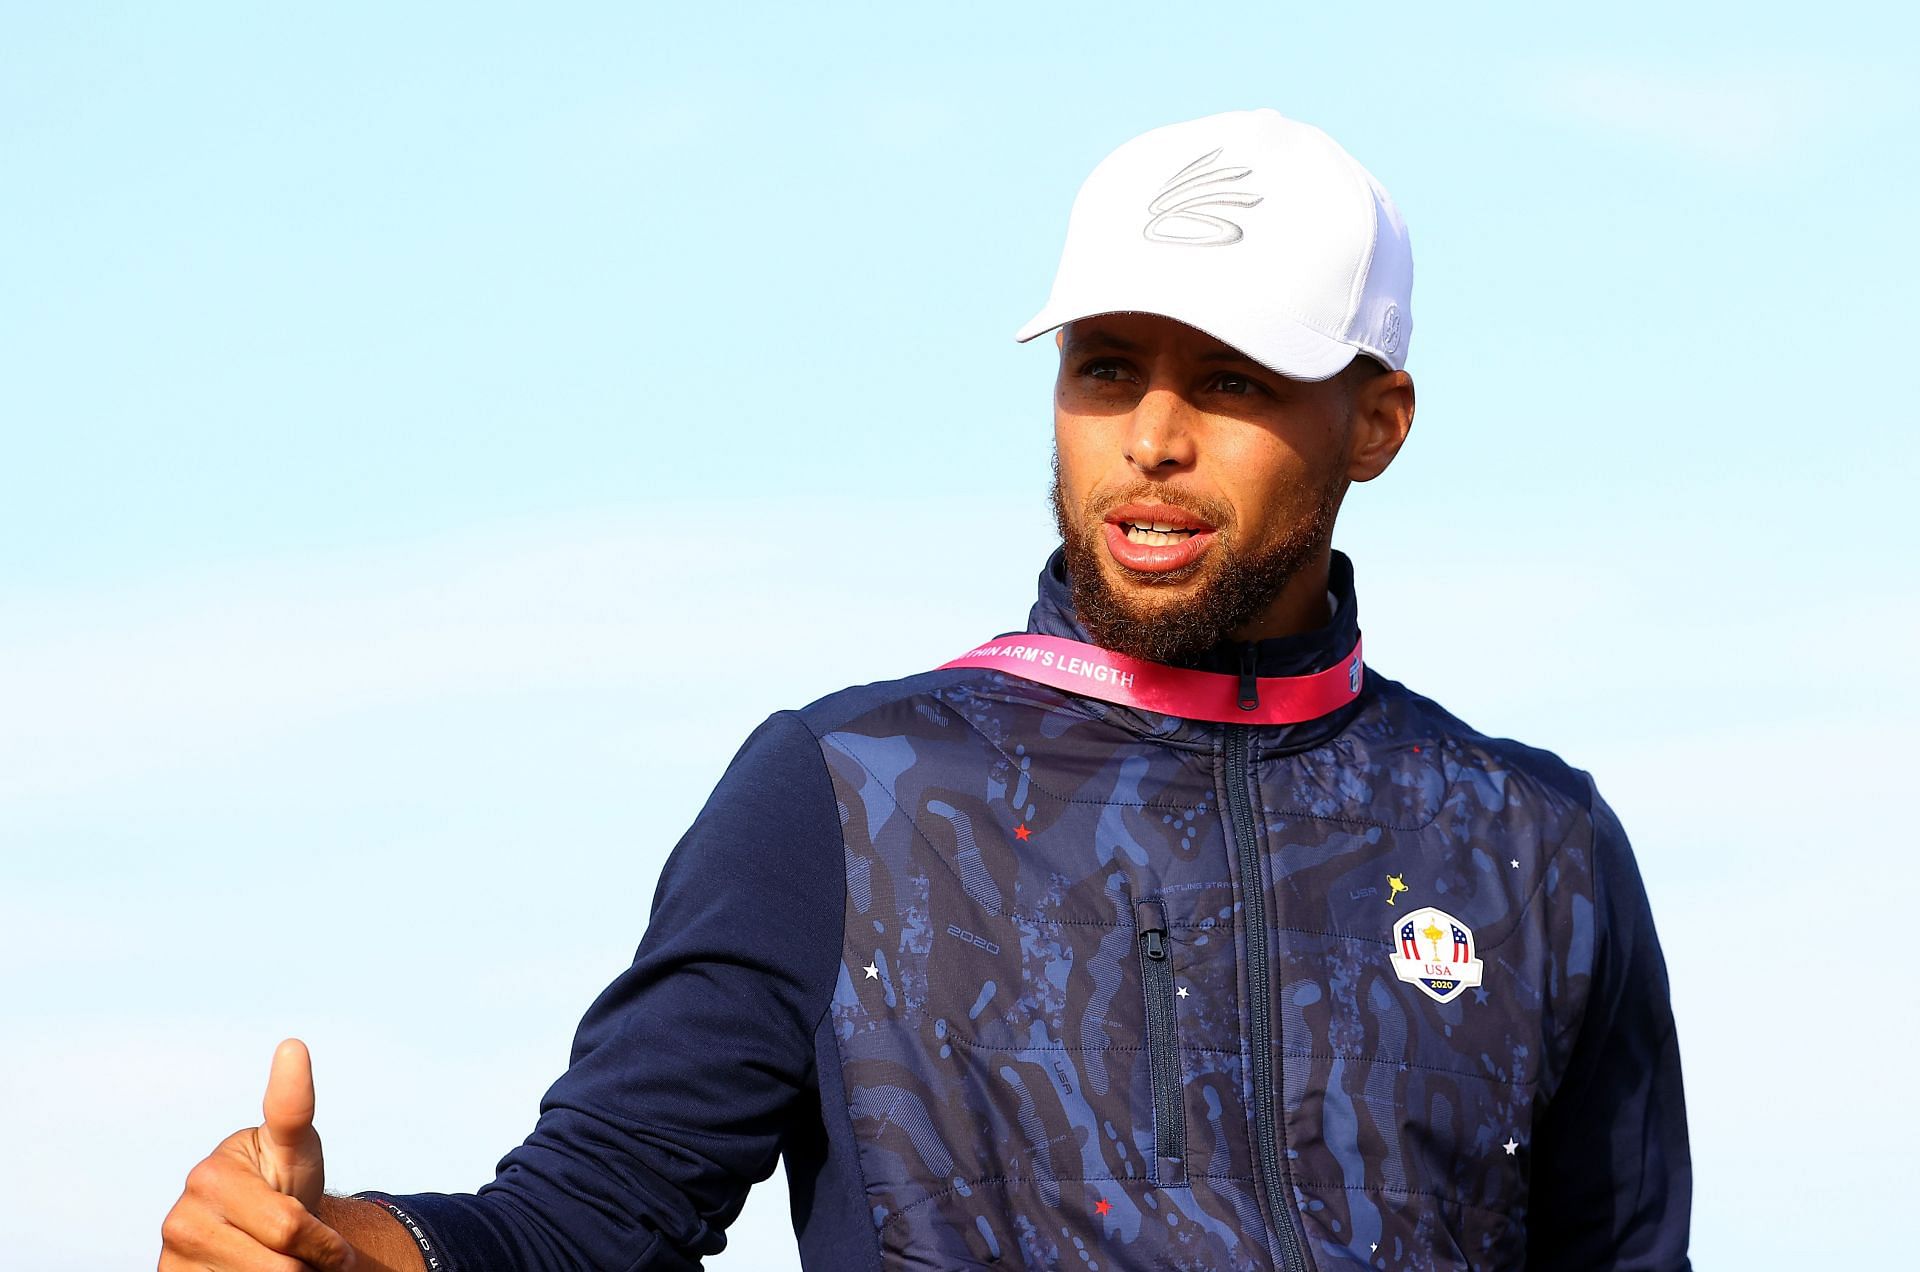 Steph Curry looks on during Friday Afternoon Fourball Matches of the 43rd Ryder Cup at Whistling Straits